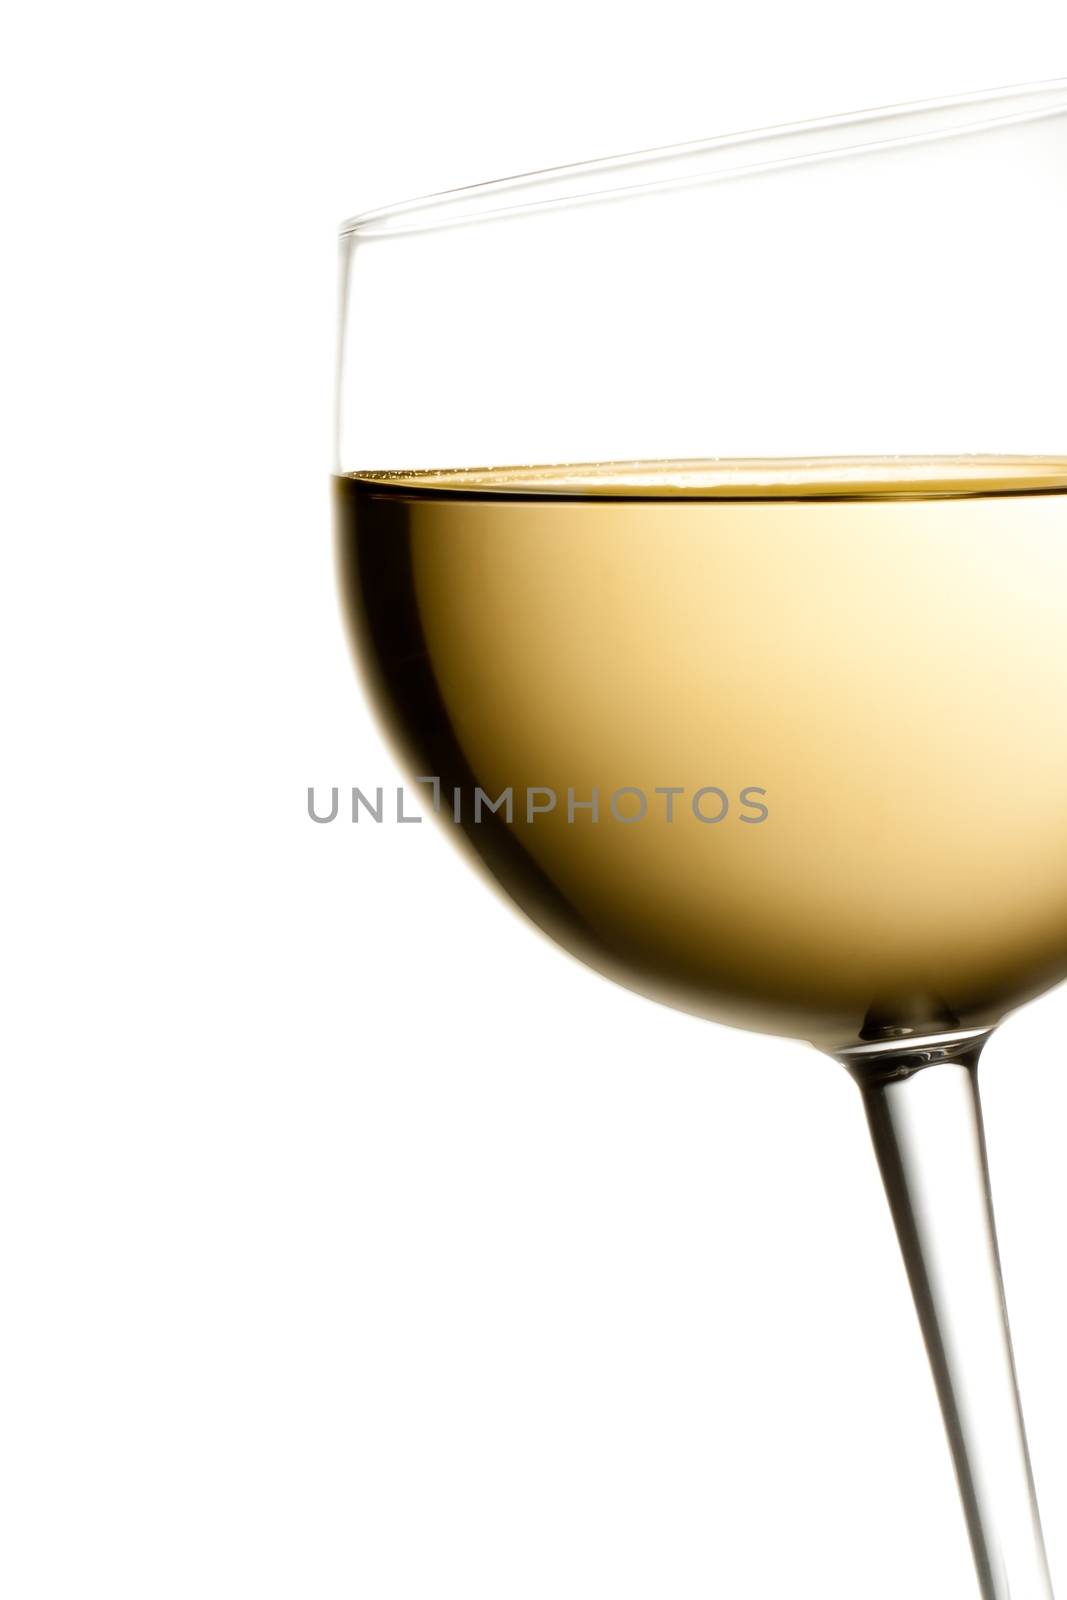 glass of white wine tilted with space for text  by donfiore